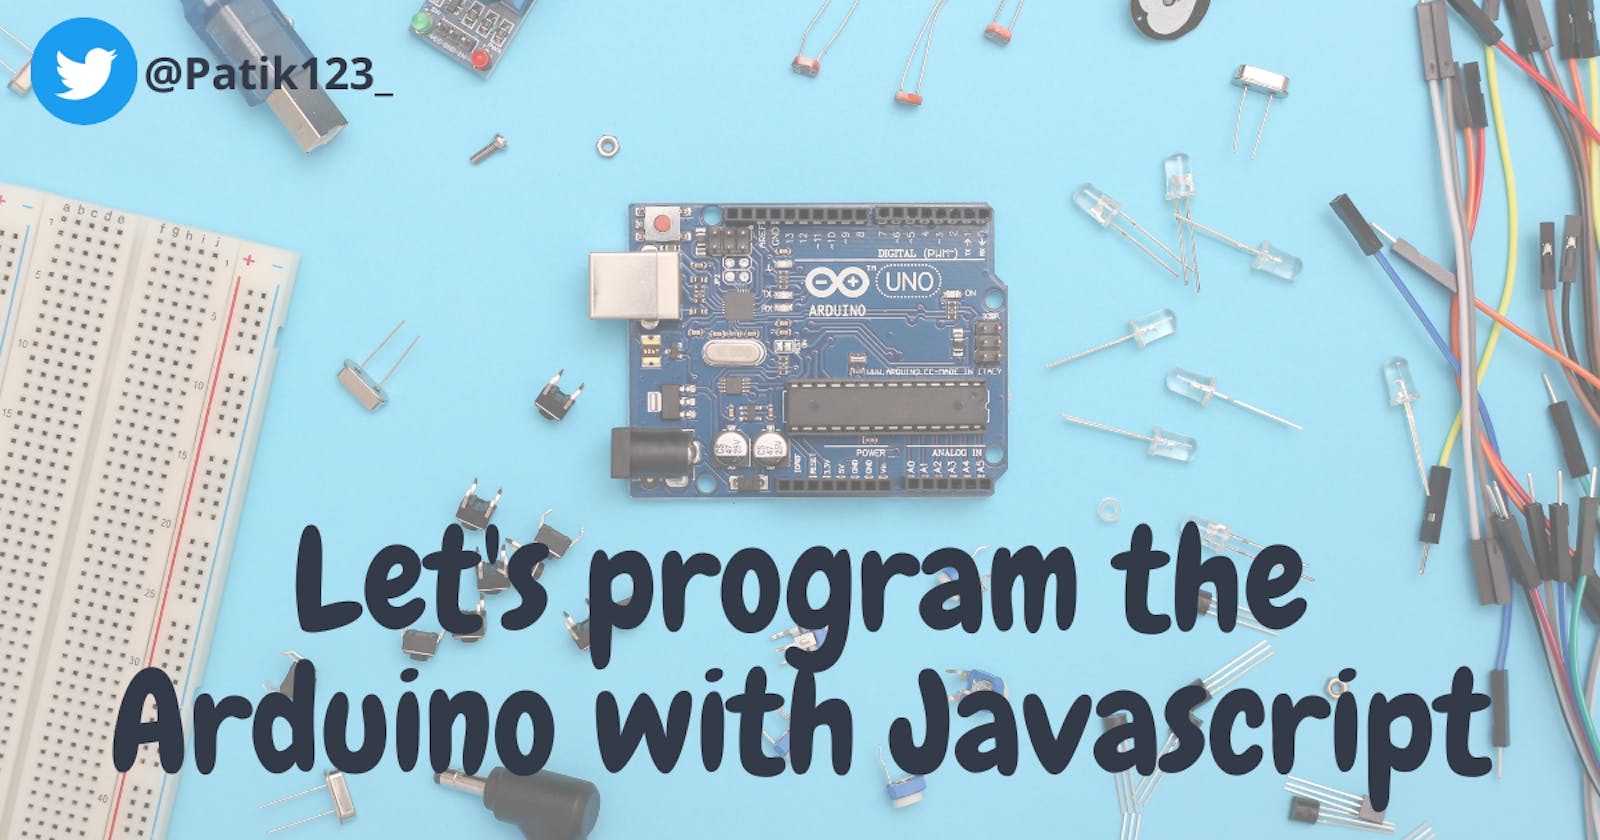 Let's program the Arduino with Javascript🤯